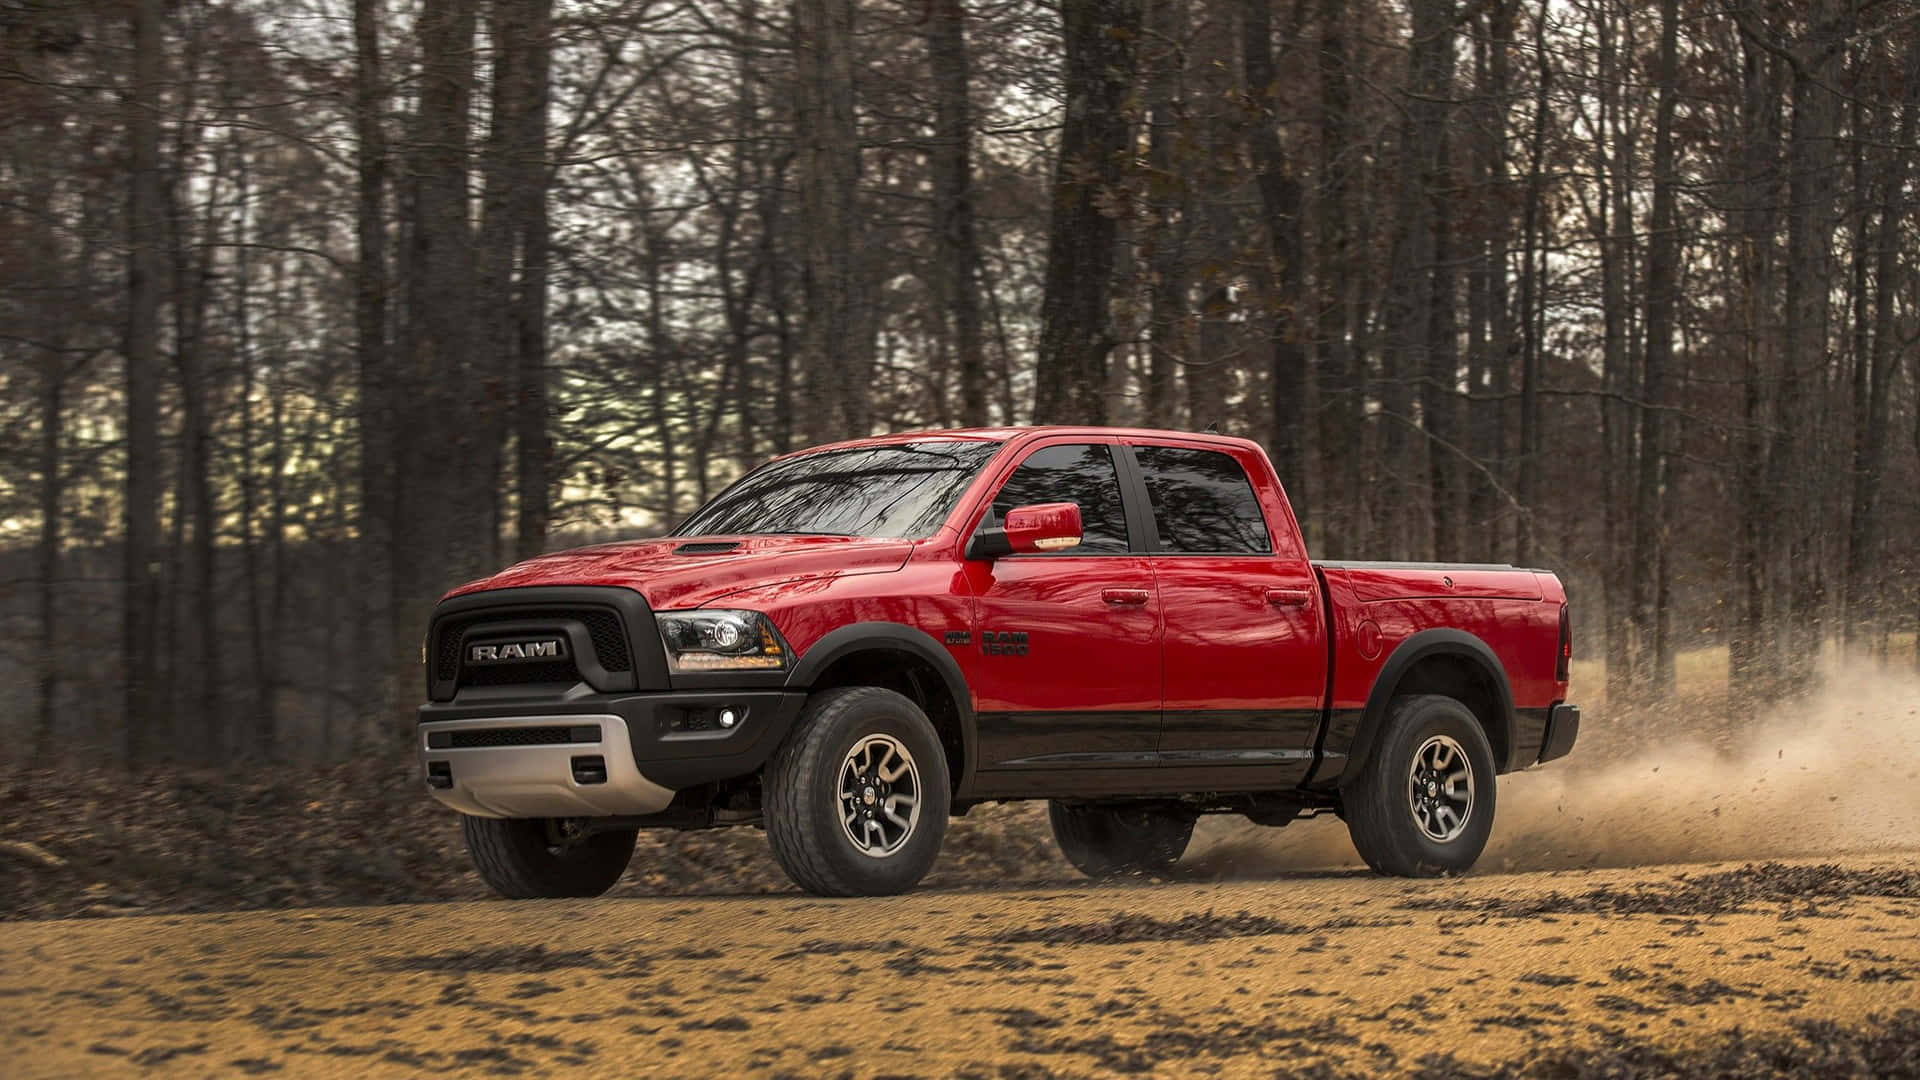 The Red 2019 Ram 1500 Is Driving Down A Dirt Road